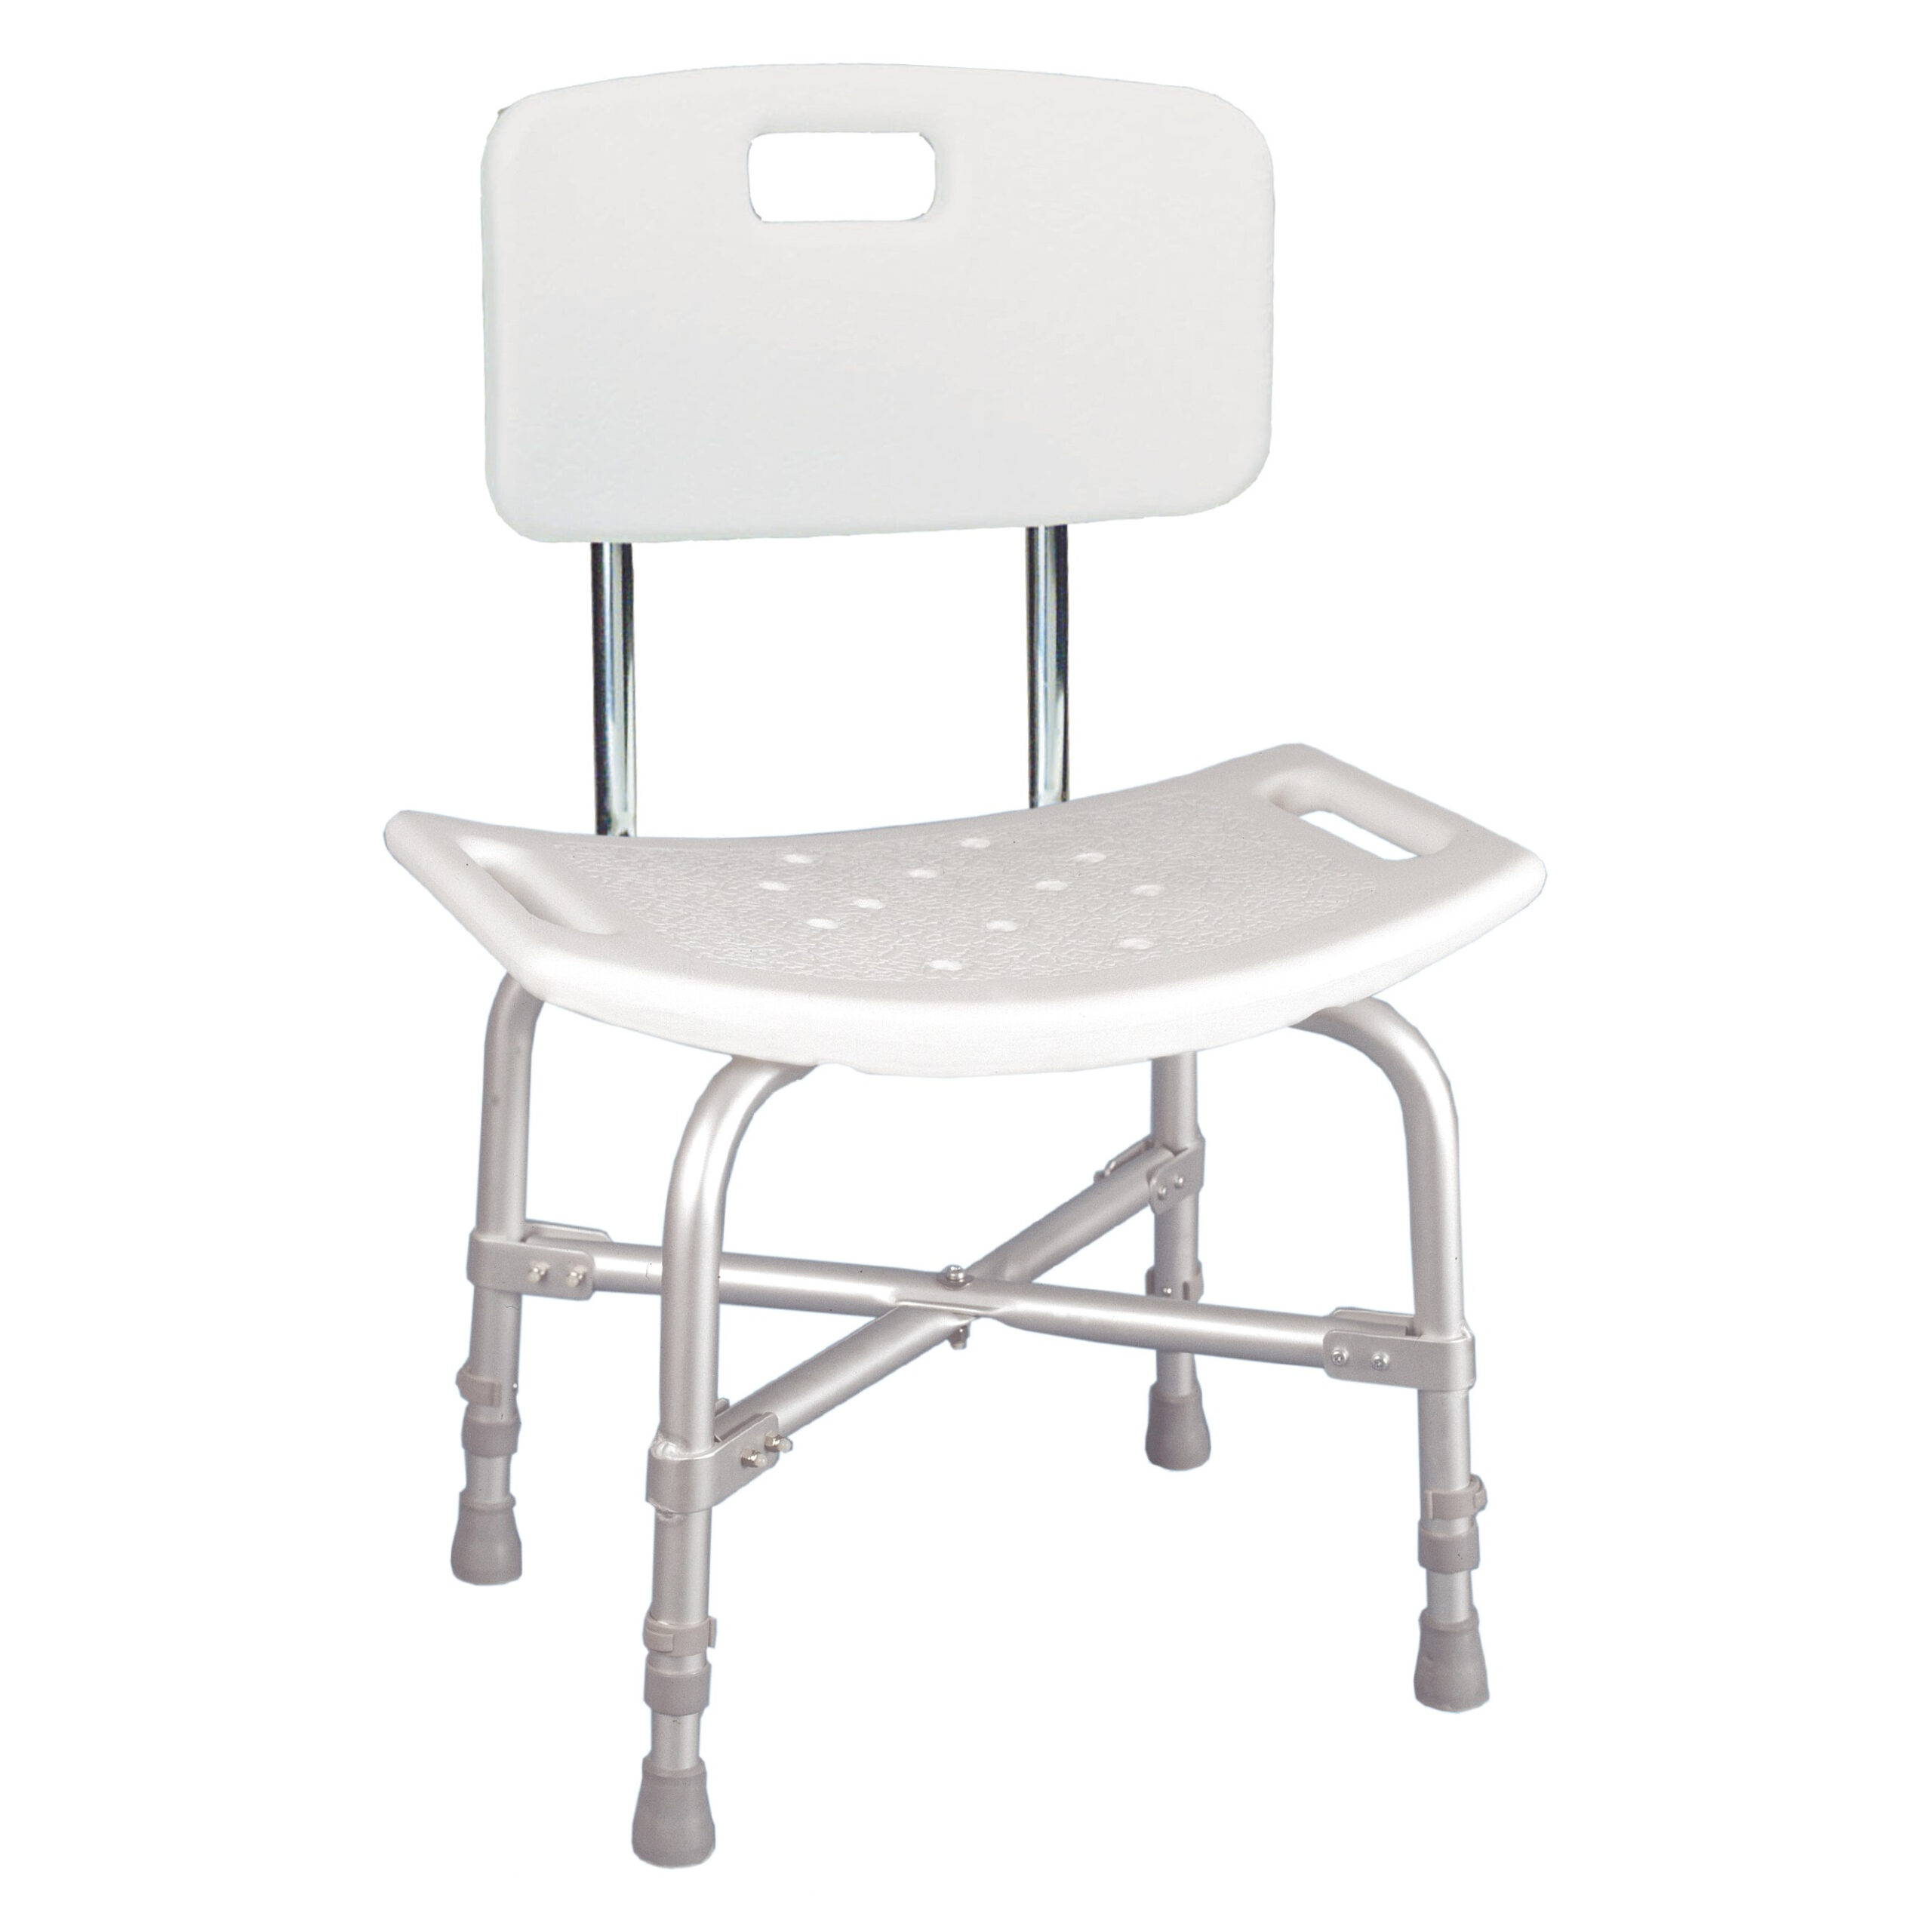 Deluxe Bariatric Shower Chair With Cross-Frame Brace